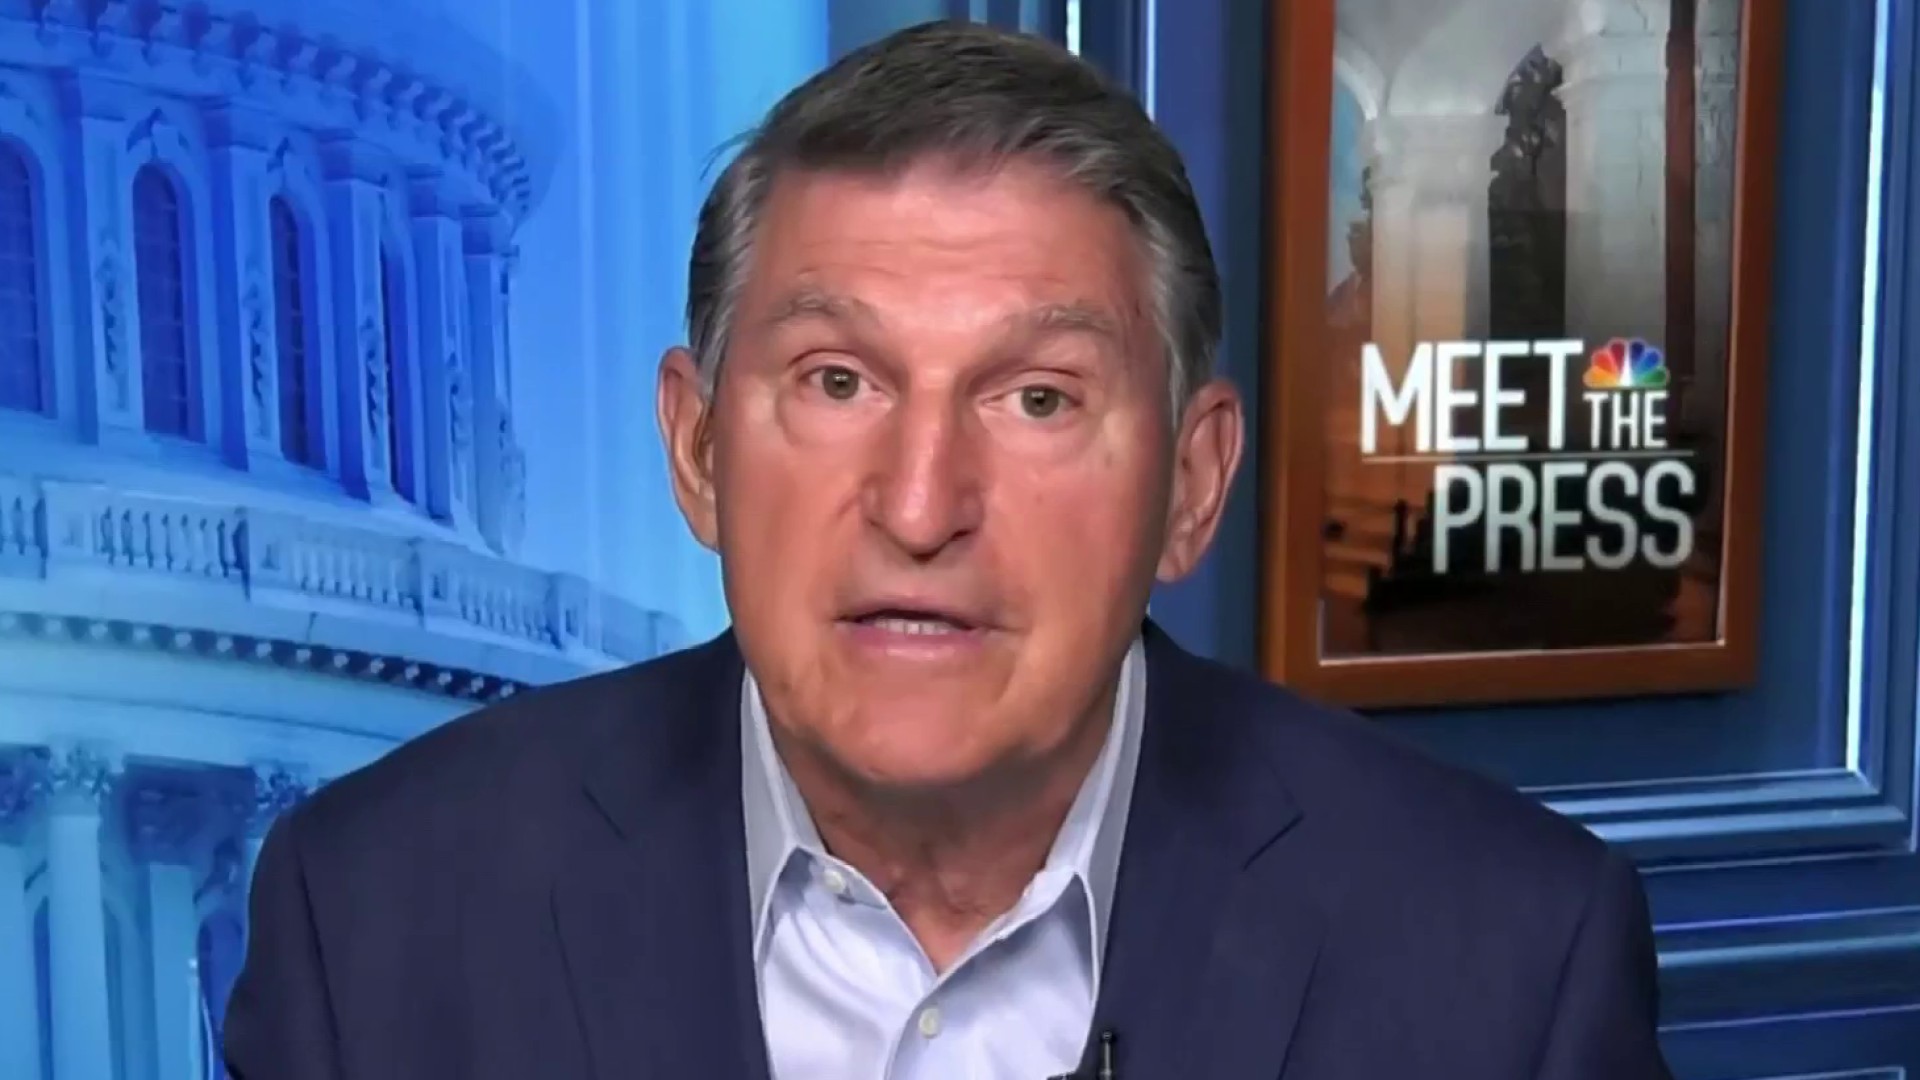 Full Manchin: ‘I give credit to everyone’ for debt deal; dodges giving credit to Biden